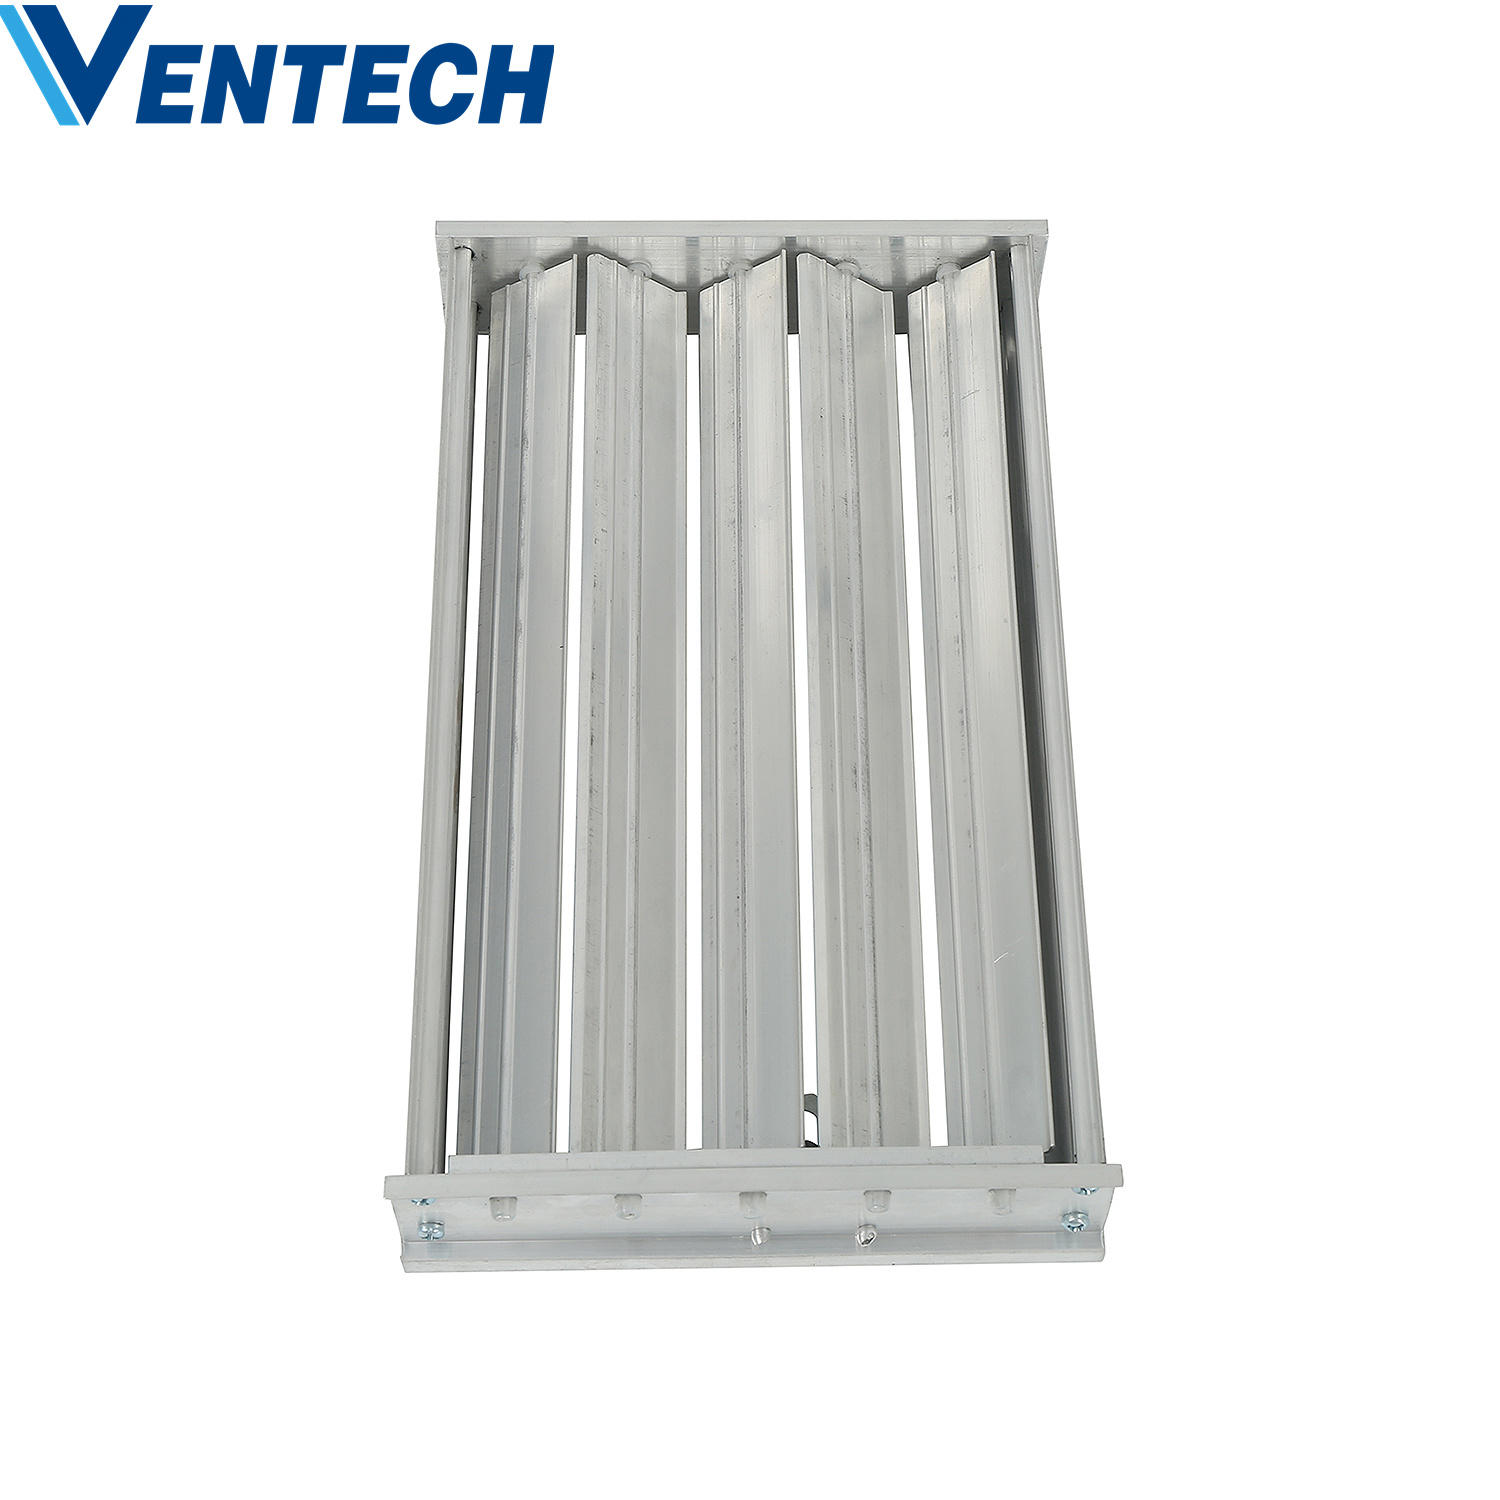 VENTECH HVAC Exhaust Air Duct Conditioning Supply Aluminum Manual Adjustable Opposed Blade Air Volume Control Air Dampers